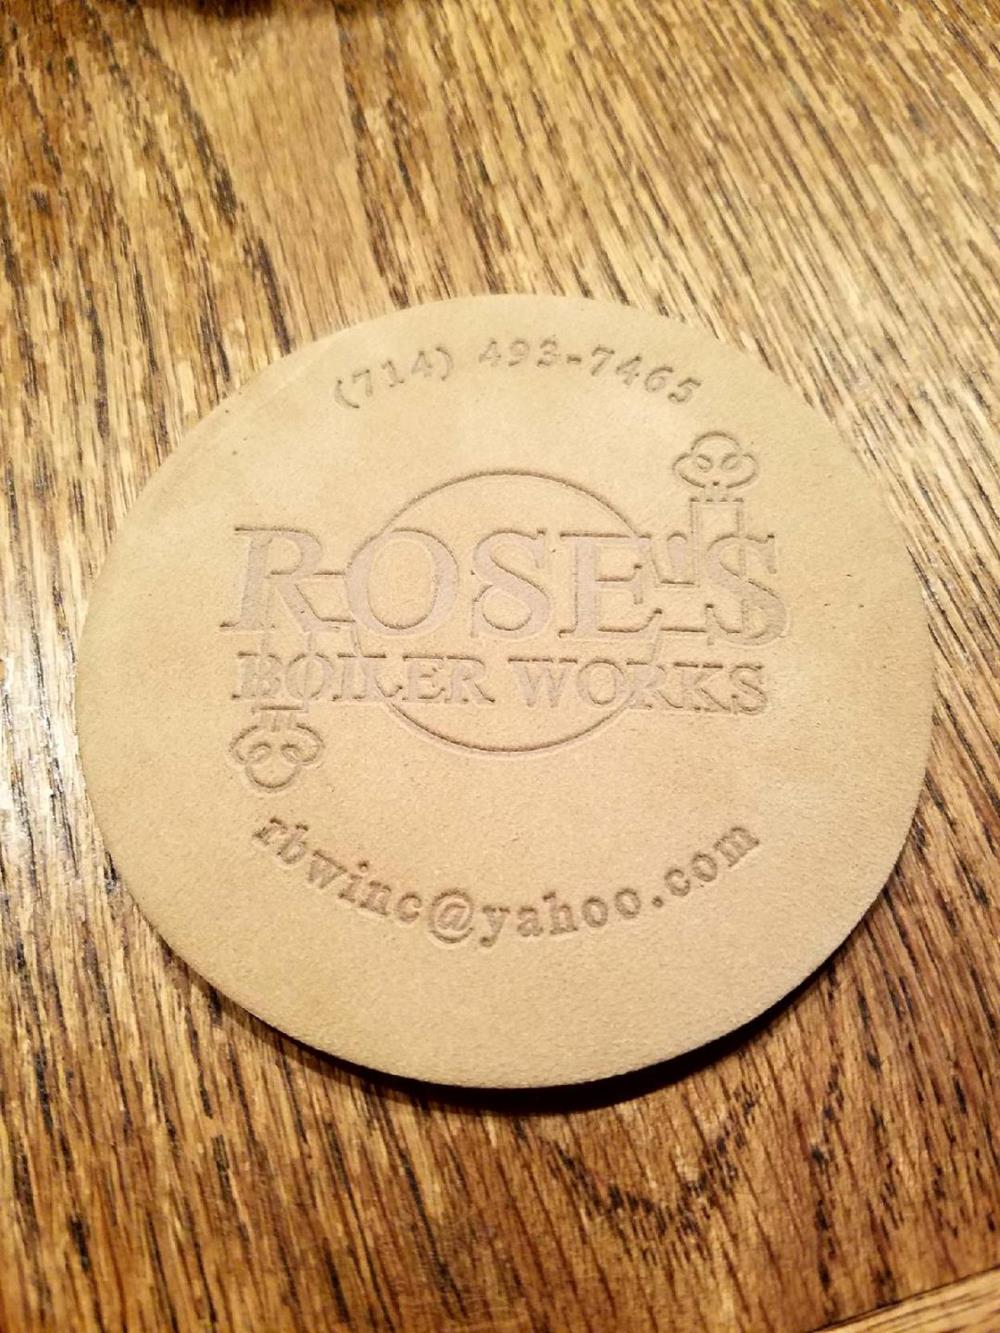 a round brown coaster on a wooden surface